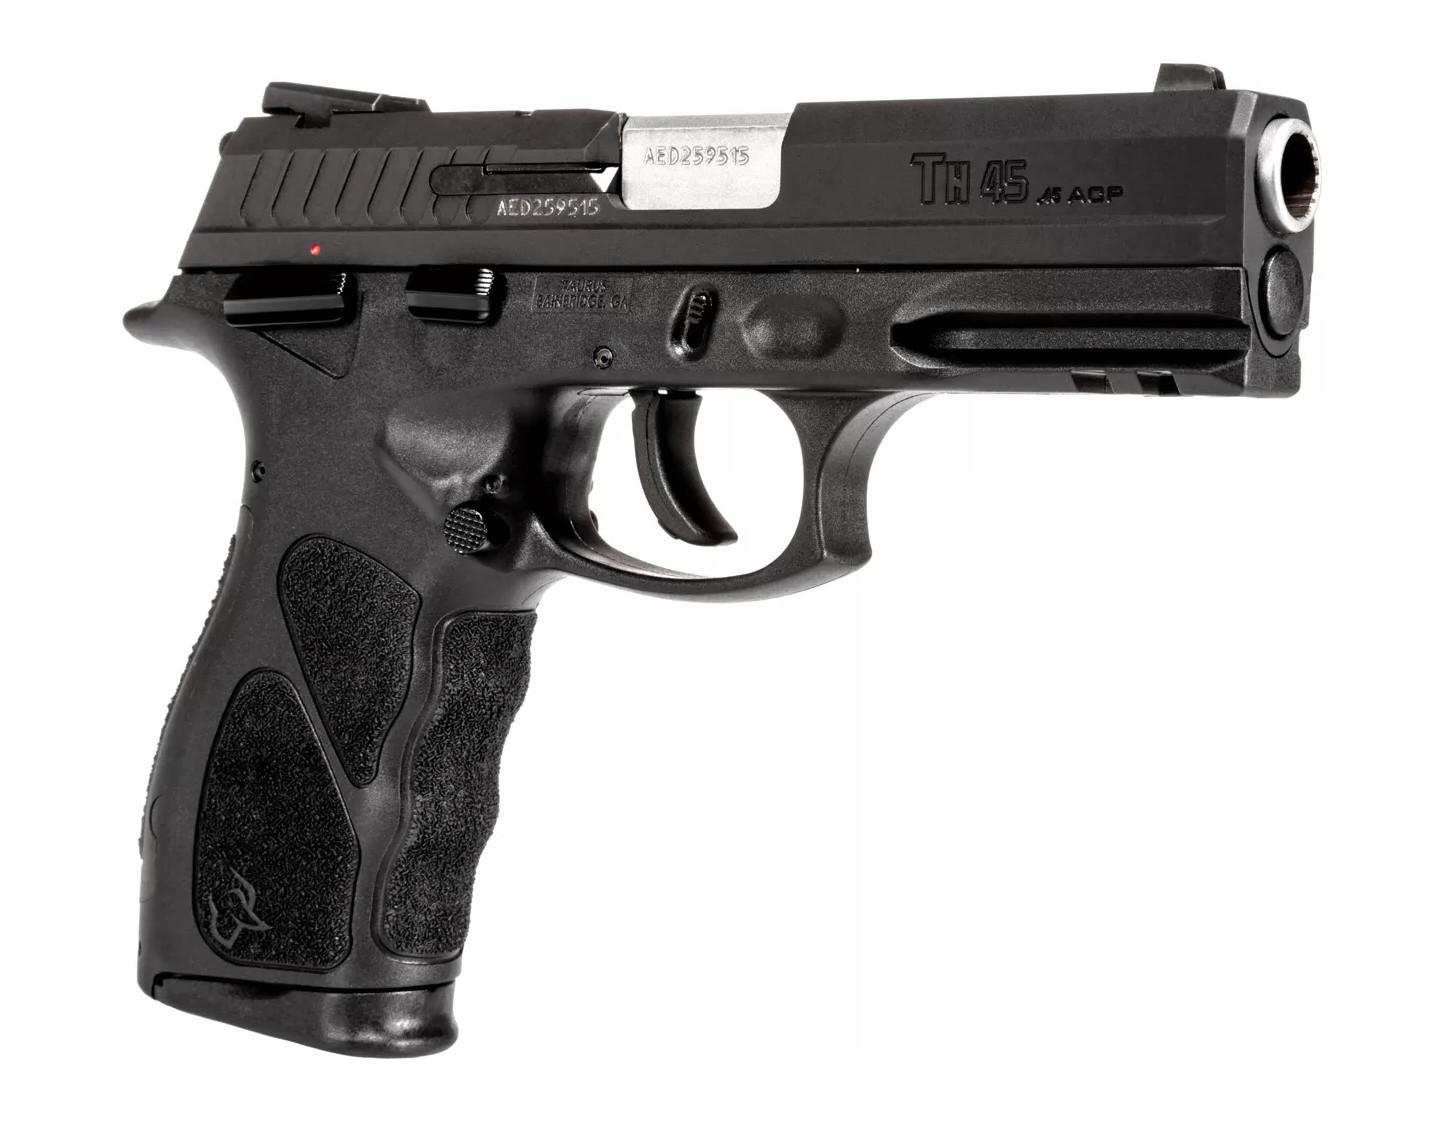 The new Taurus TH45 in .45 ACP